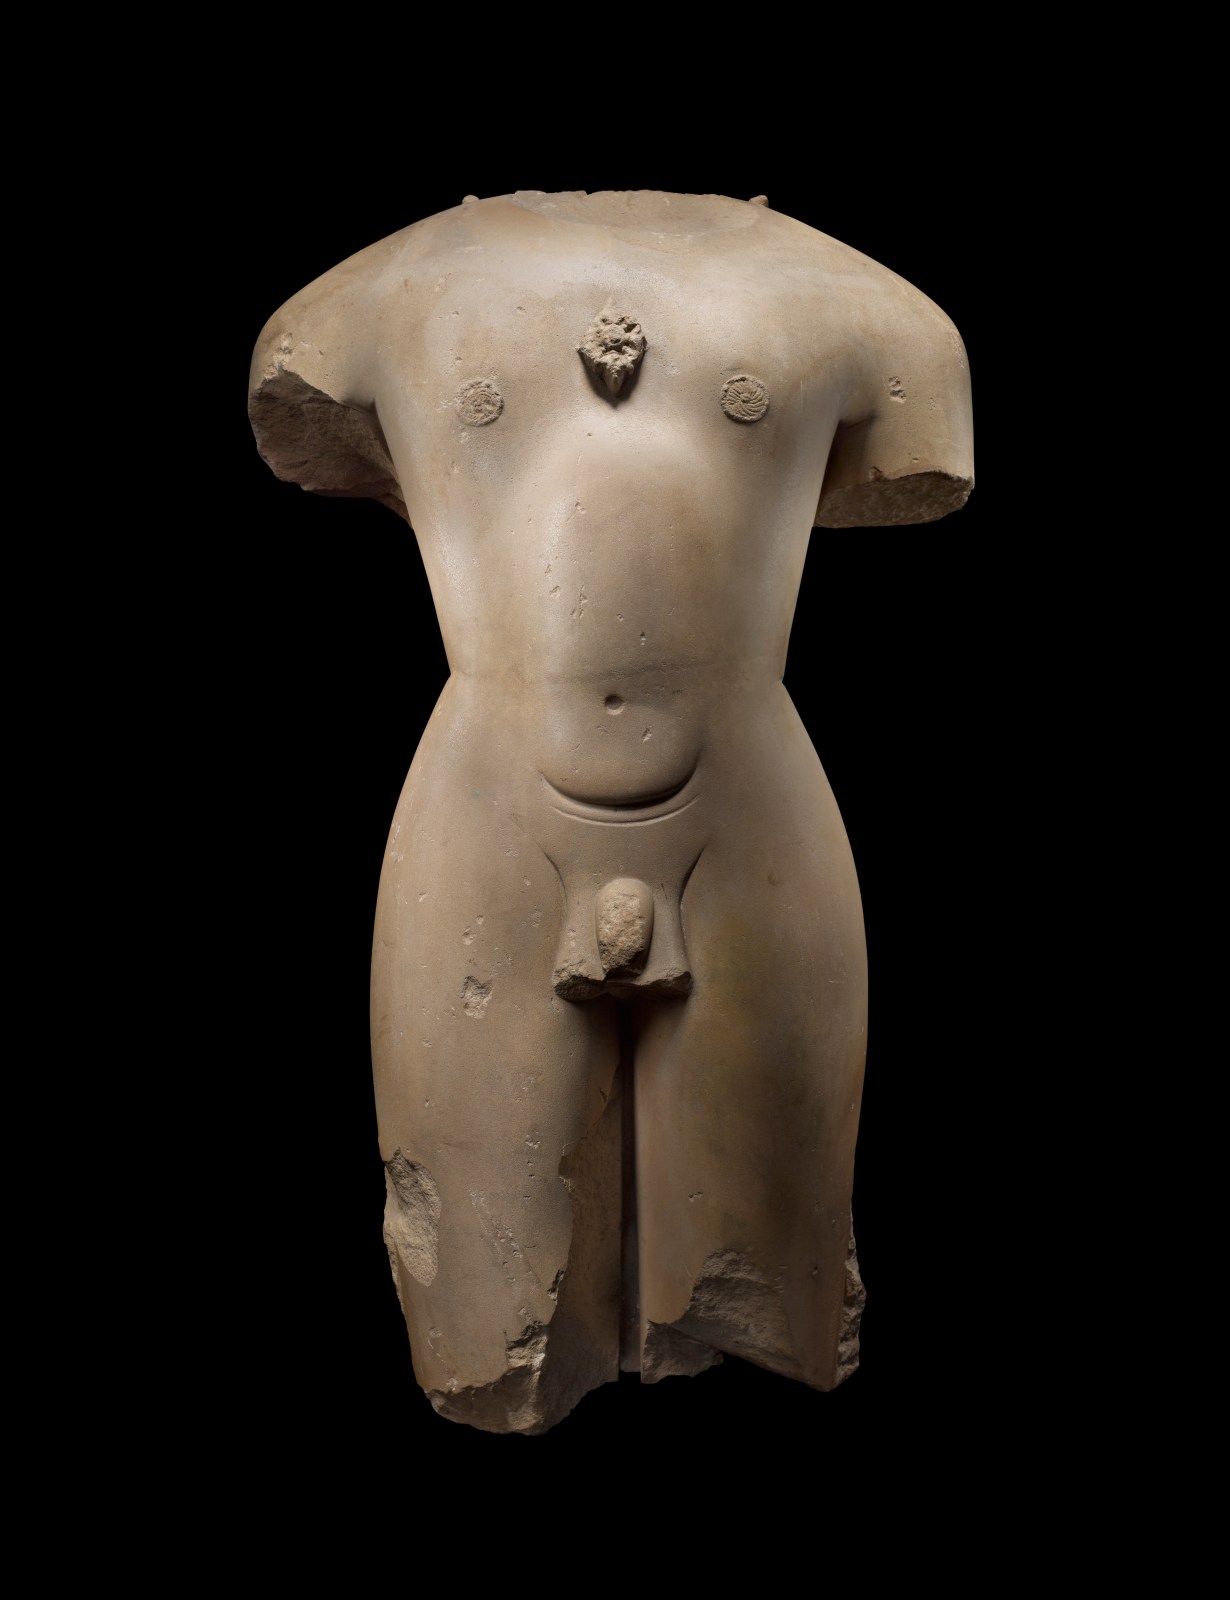 Same photo of a polished torso of a Jina (which at one time would have been a complete standing tirthankara figure) 